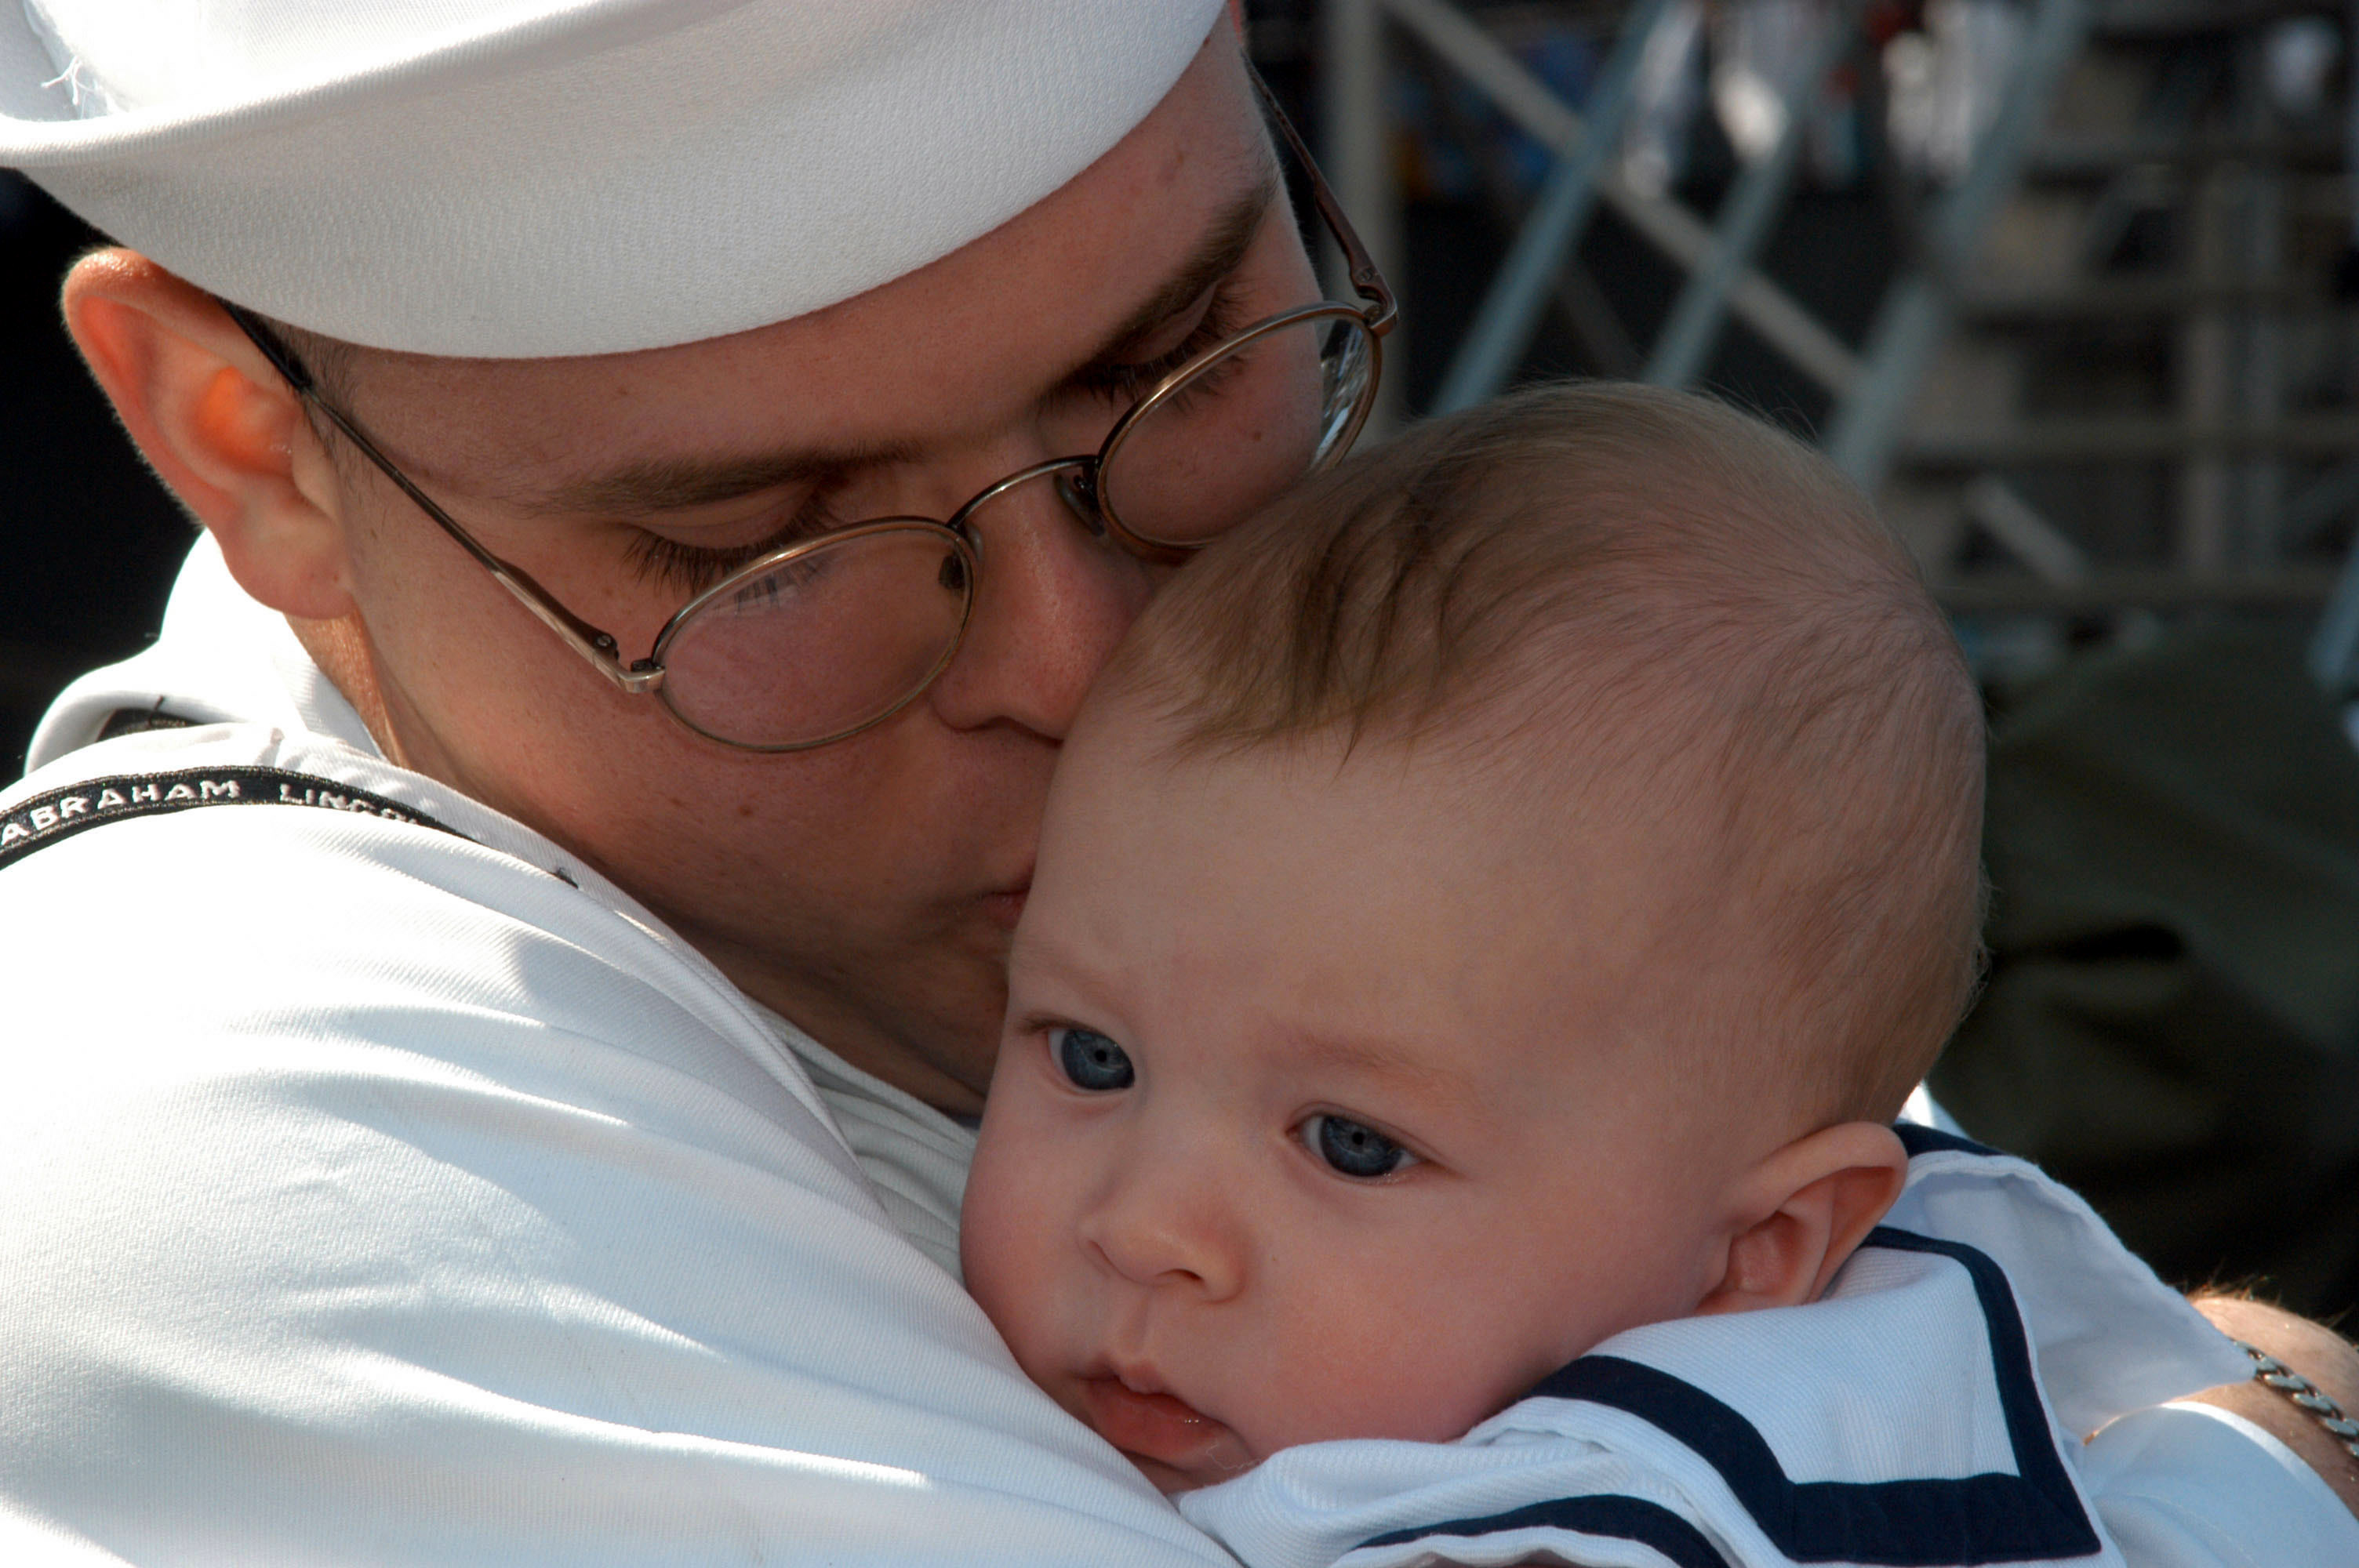 US Navy 030506-N-1002W-003 A sailor aboard USS Abraham Lincoln (CVN 72) embraces his son for the first time